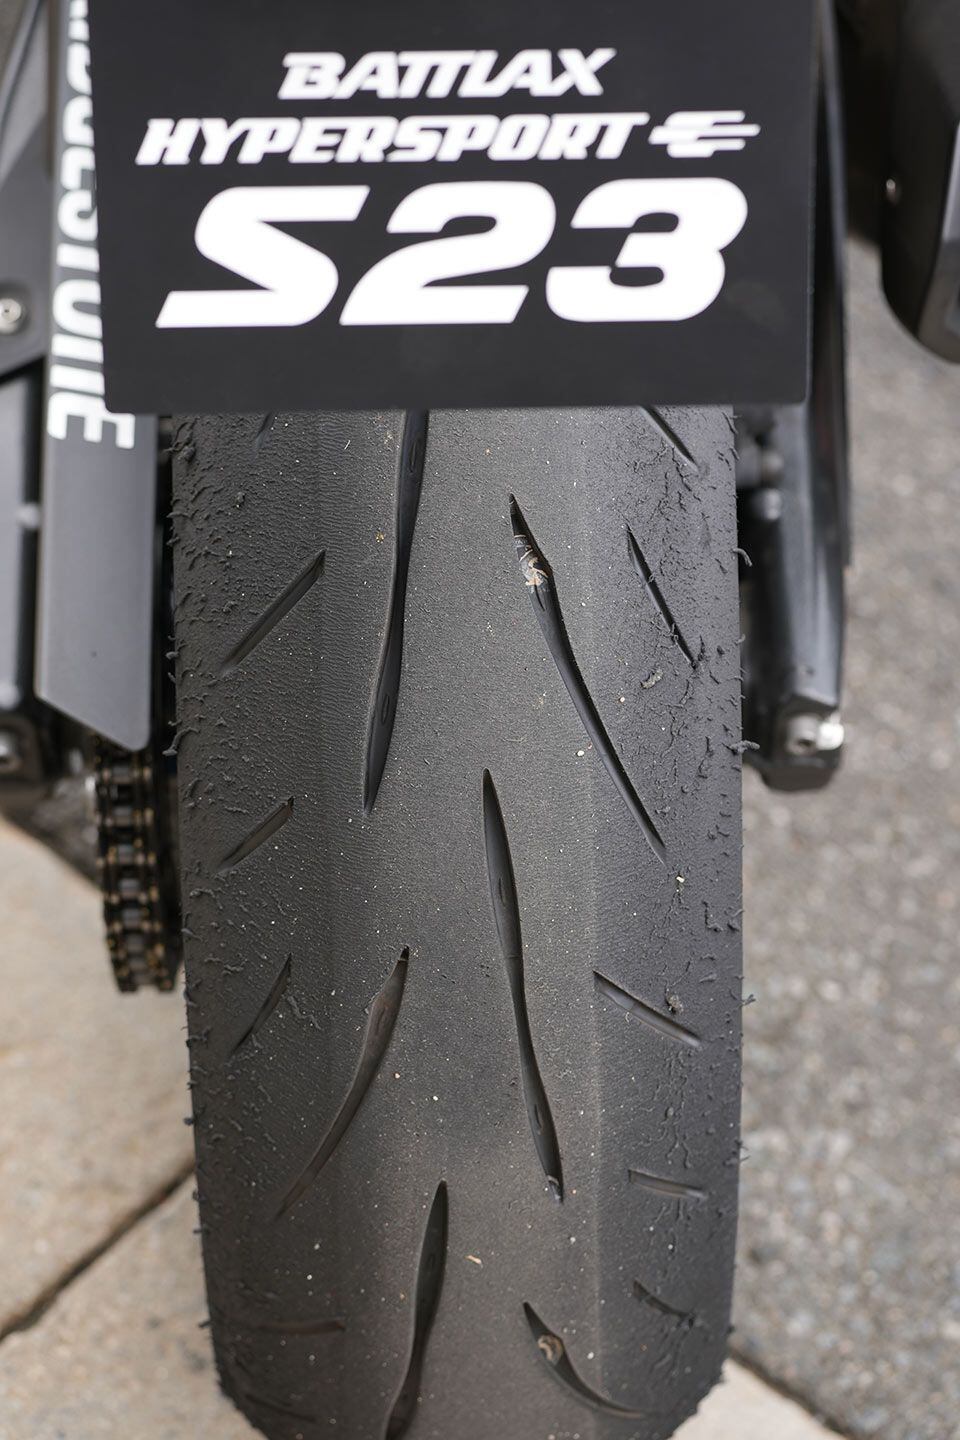 The Battlax S23 holds up well on an warm, abrasive circuit. Here you can spot the separate compound zones inside the rear tire.